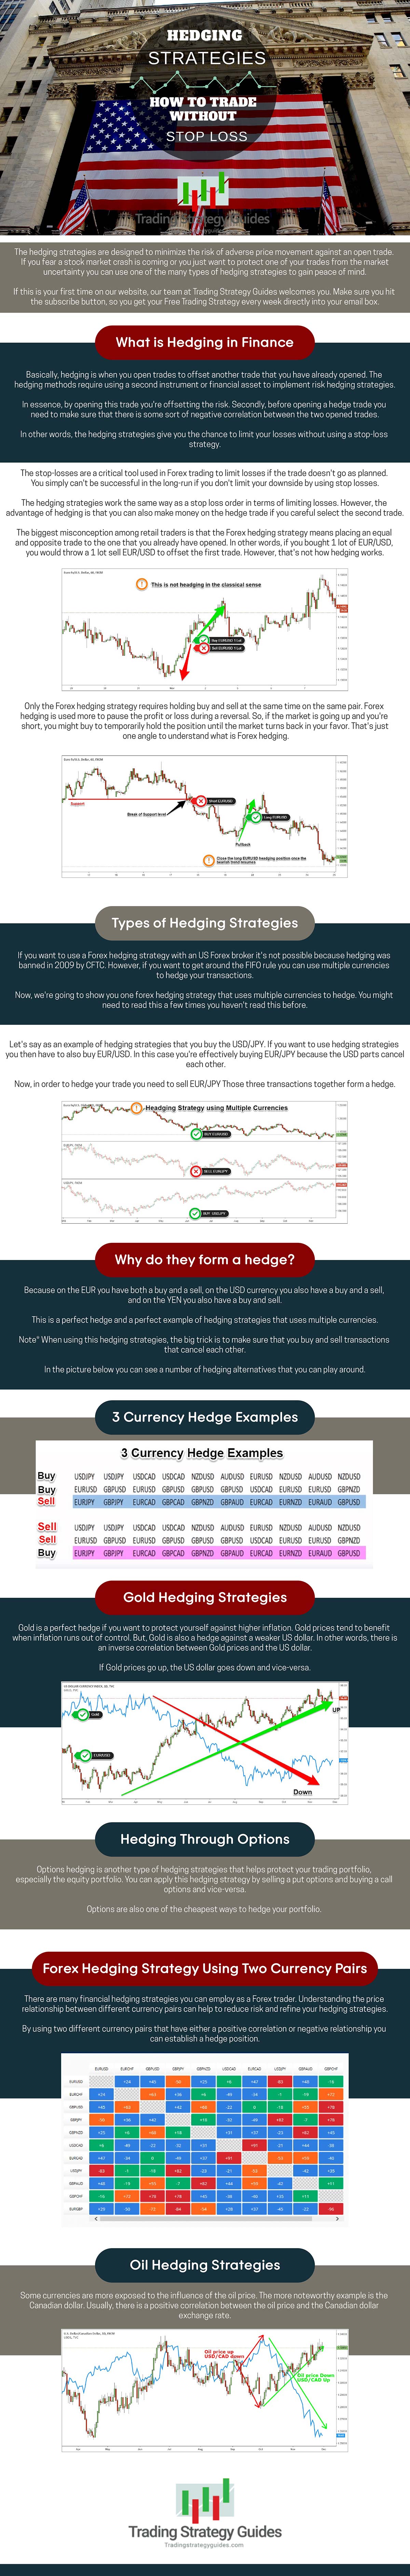 Forex hedging strategy protection against losses